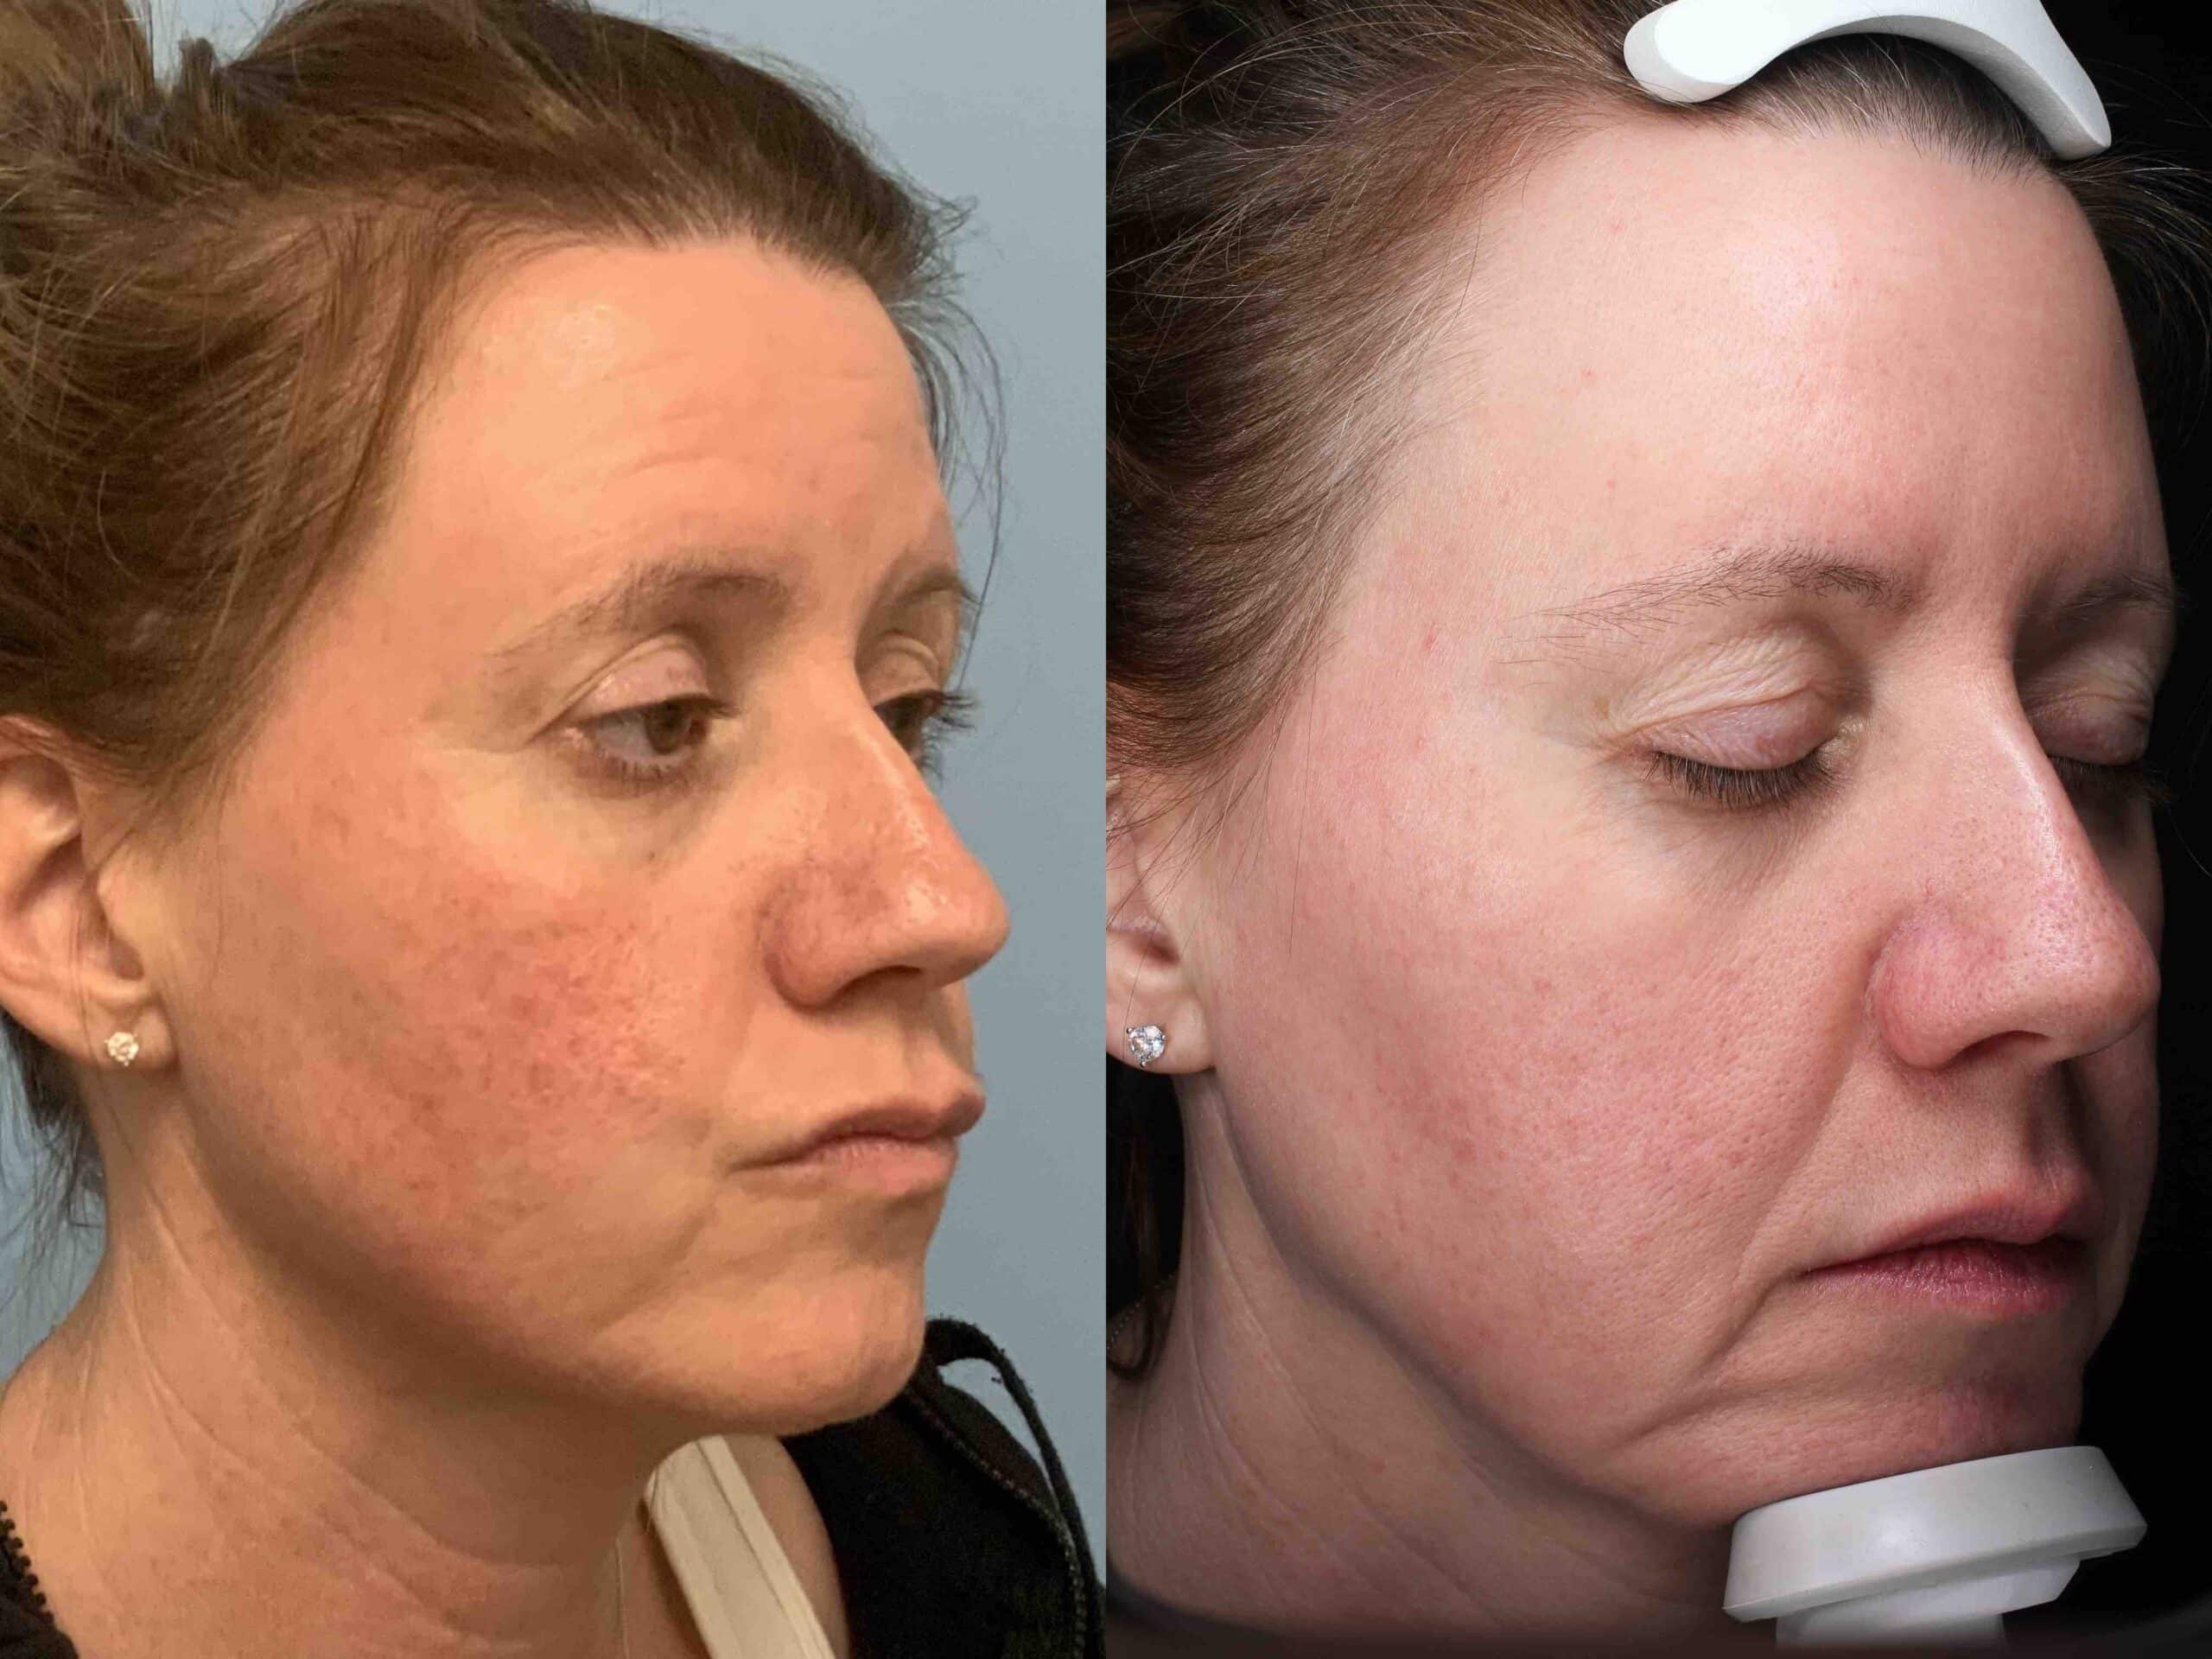 Before and after, 10 mo post-treatment from Laser Resurfacing performed by Dr. Paul Vanek